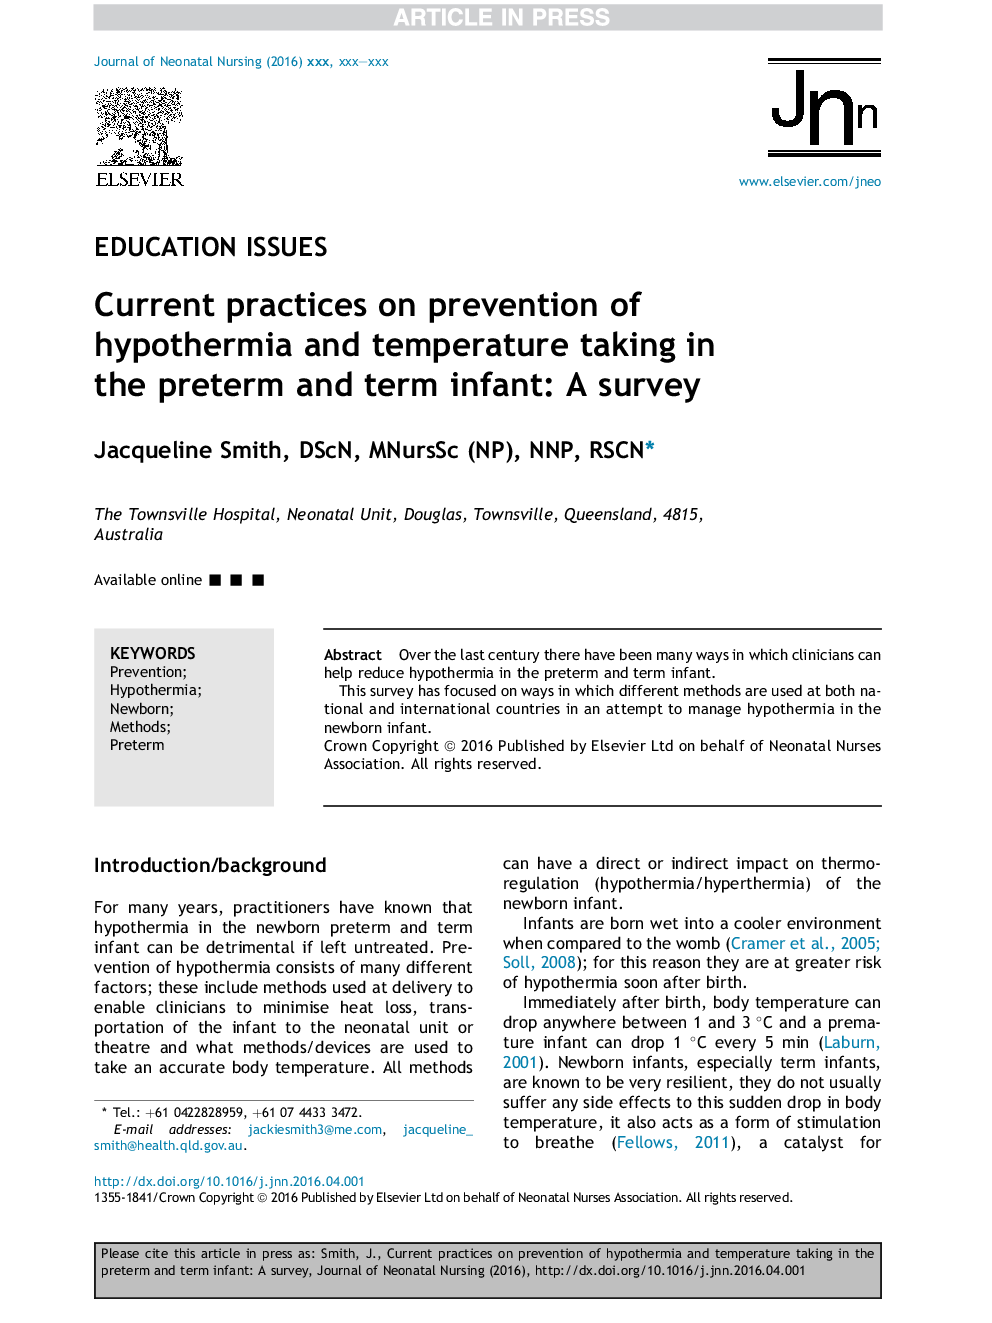 Current practices on prevention of hypothermia and temperature taking in the preterm and term infant: A survey